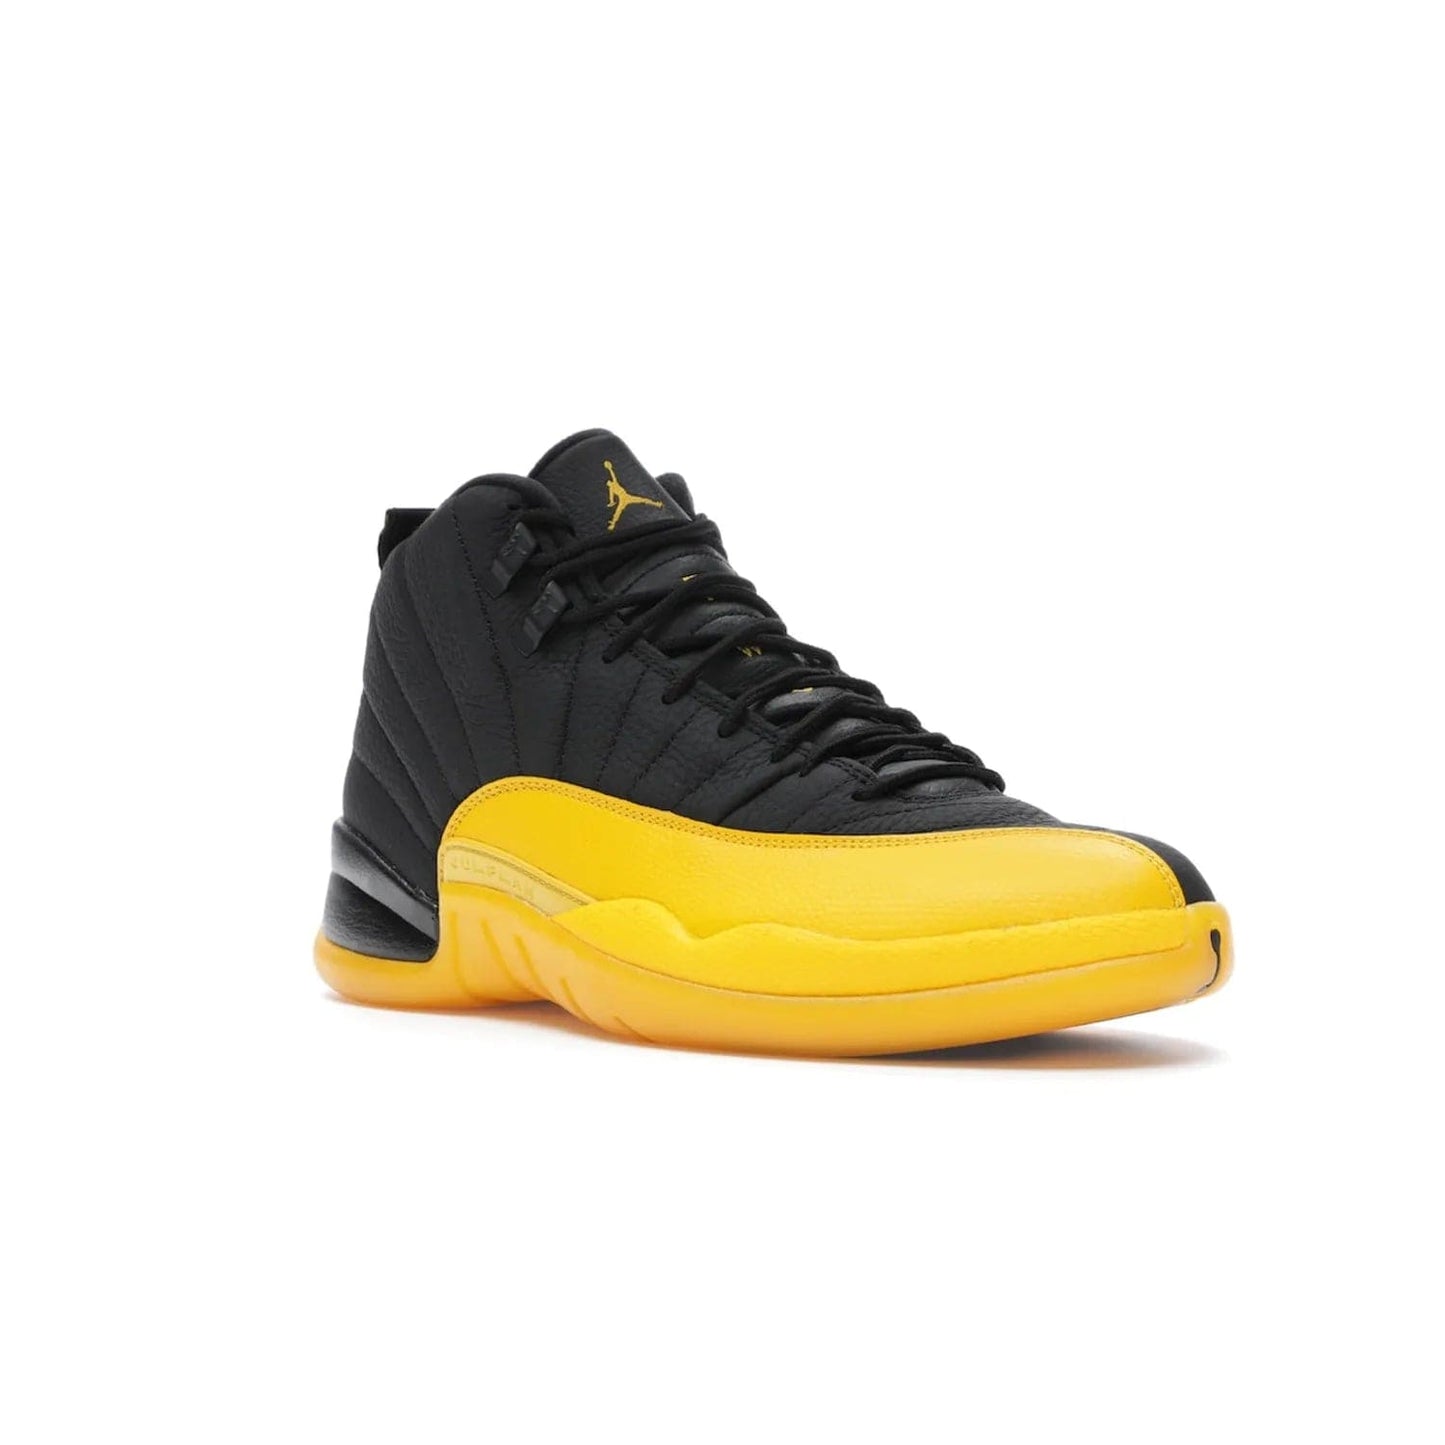 Jordan 12 Retro Black University Gold - Image 5 - Only at www.BallersClubKickz.com - This Jordan 12 Retro features a black tumbled leather upper and University Gold accents for a modern twist. Boasting Jordan "Two Three" branding and a yellow sole, these shoes will elevate your wardrobe. Fresh, sleek, and one of a kind - the Jordan 12 University Gold is your summer sneaker.